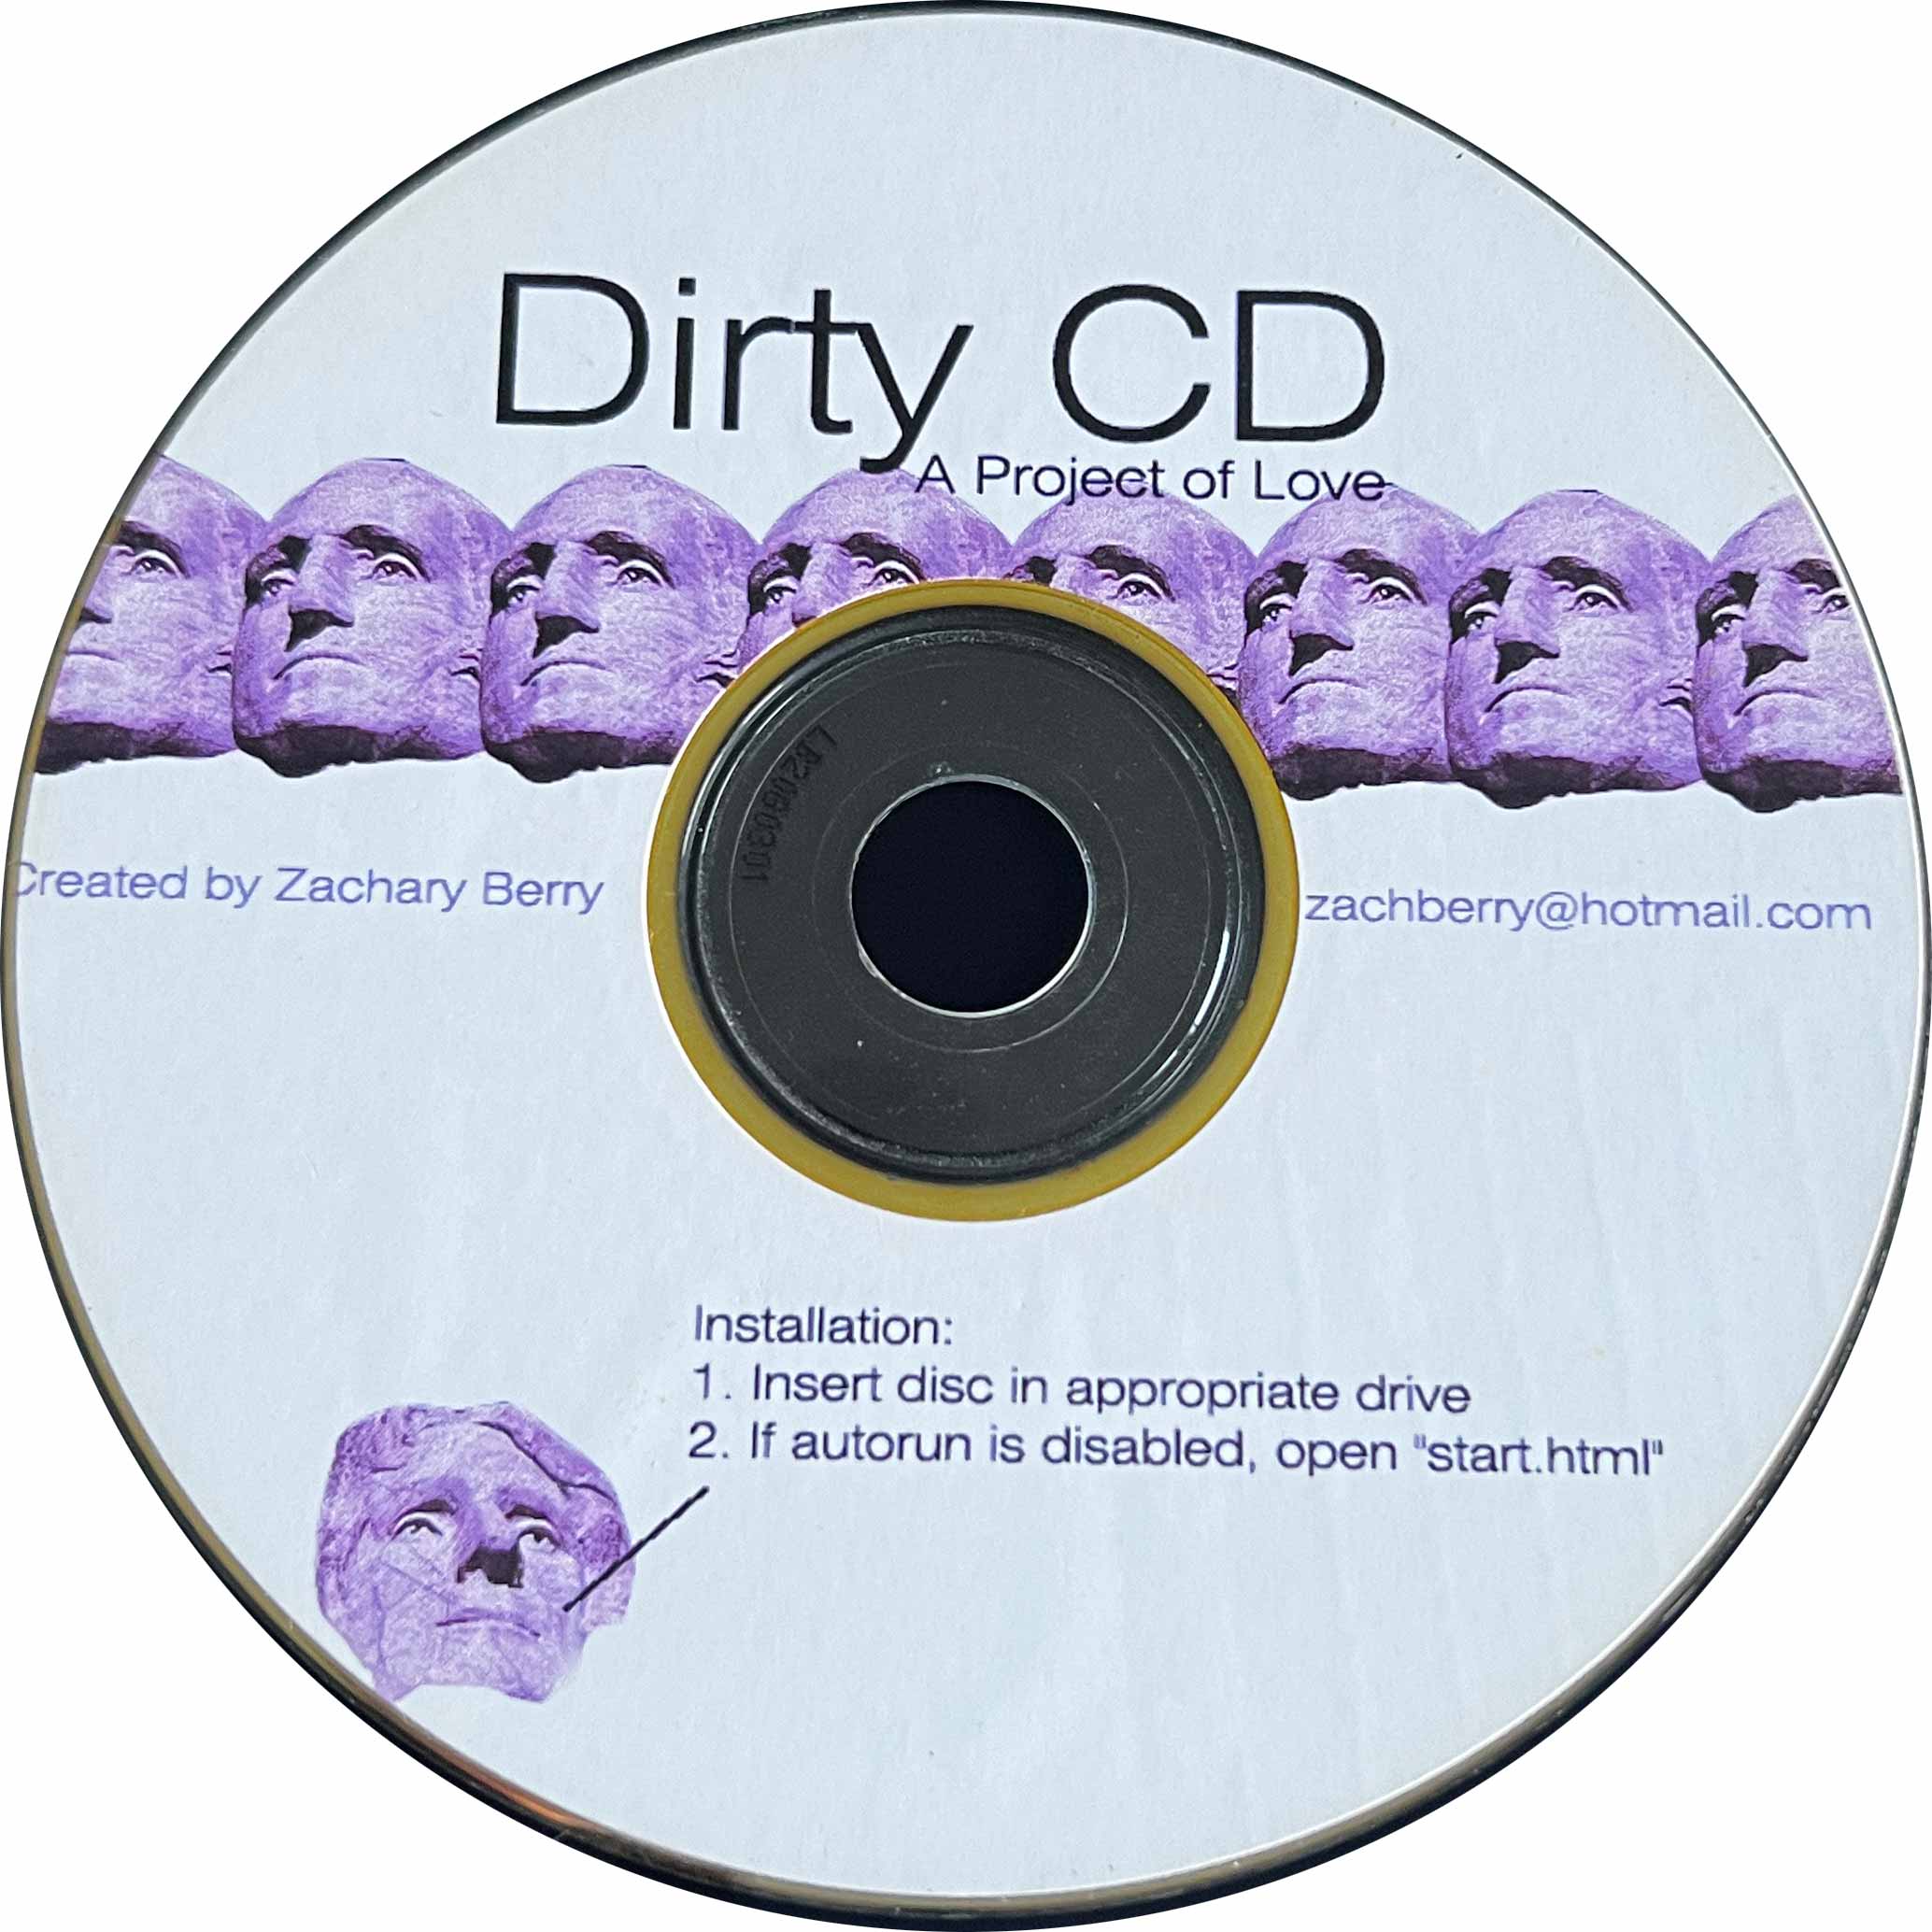 A photo of the Dirty CD CD-ROM disc